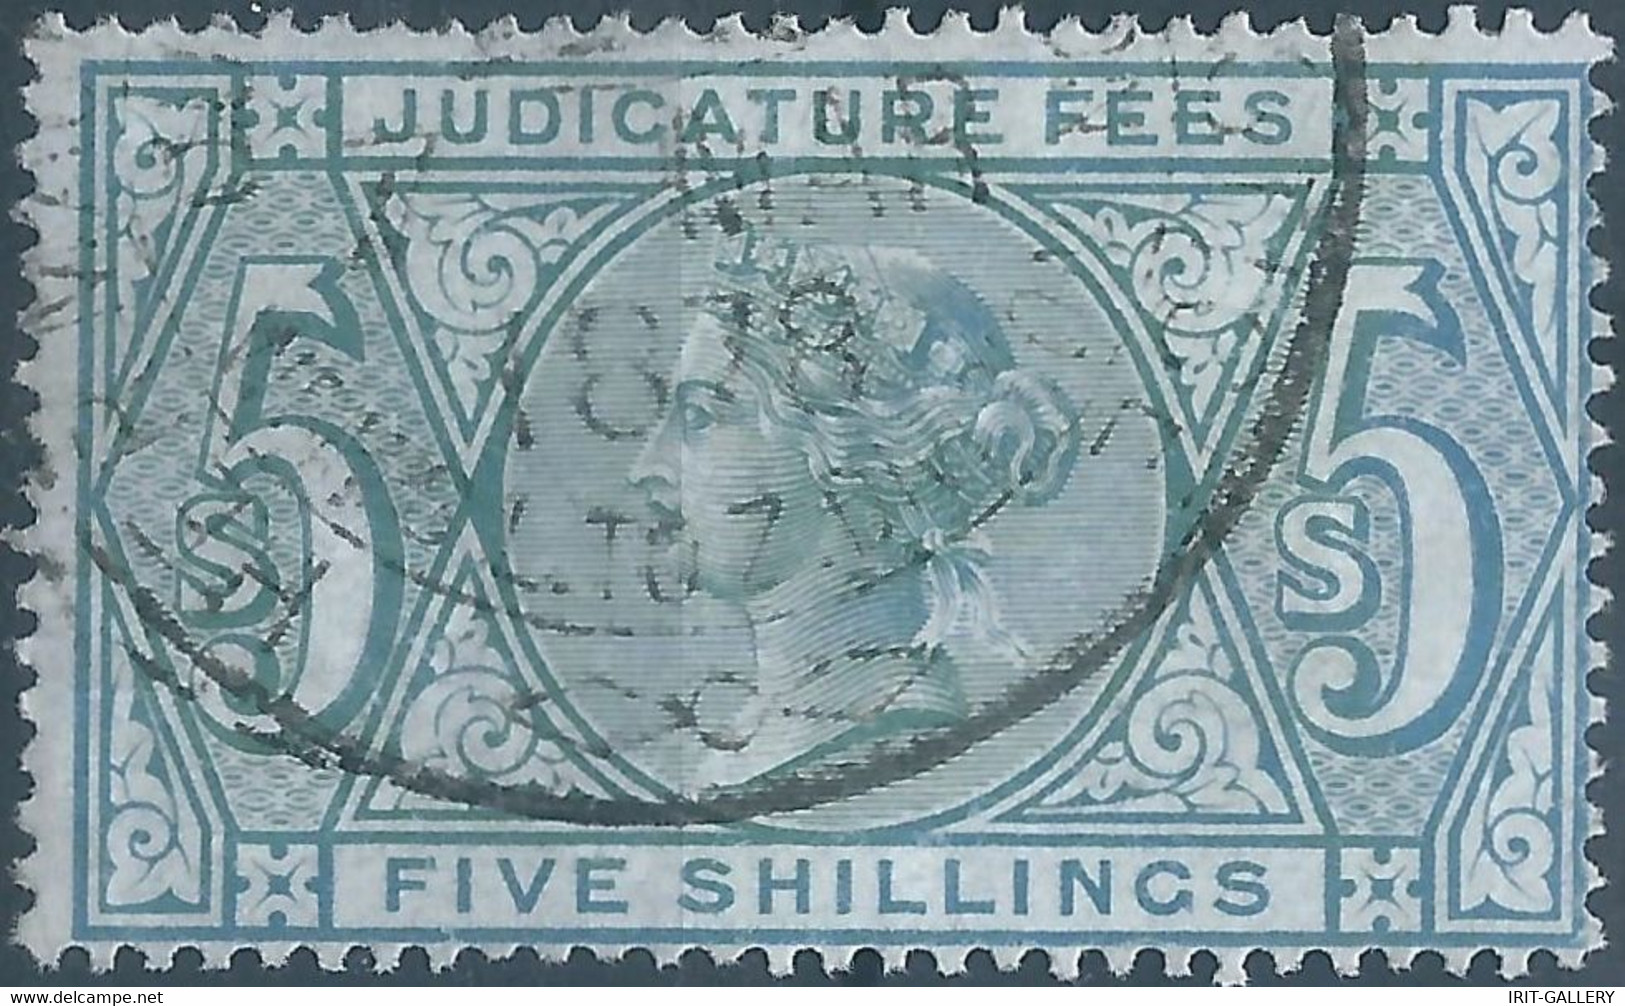 Great Britain-ENGLAND,Queen Victoria,1880-1900 Revenue Stamp Tax Fiscal,JUDICATURE FEES, 5 Shillings,Used - Steuermarken